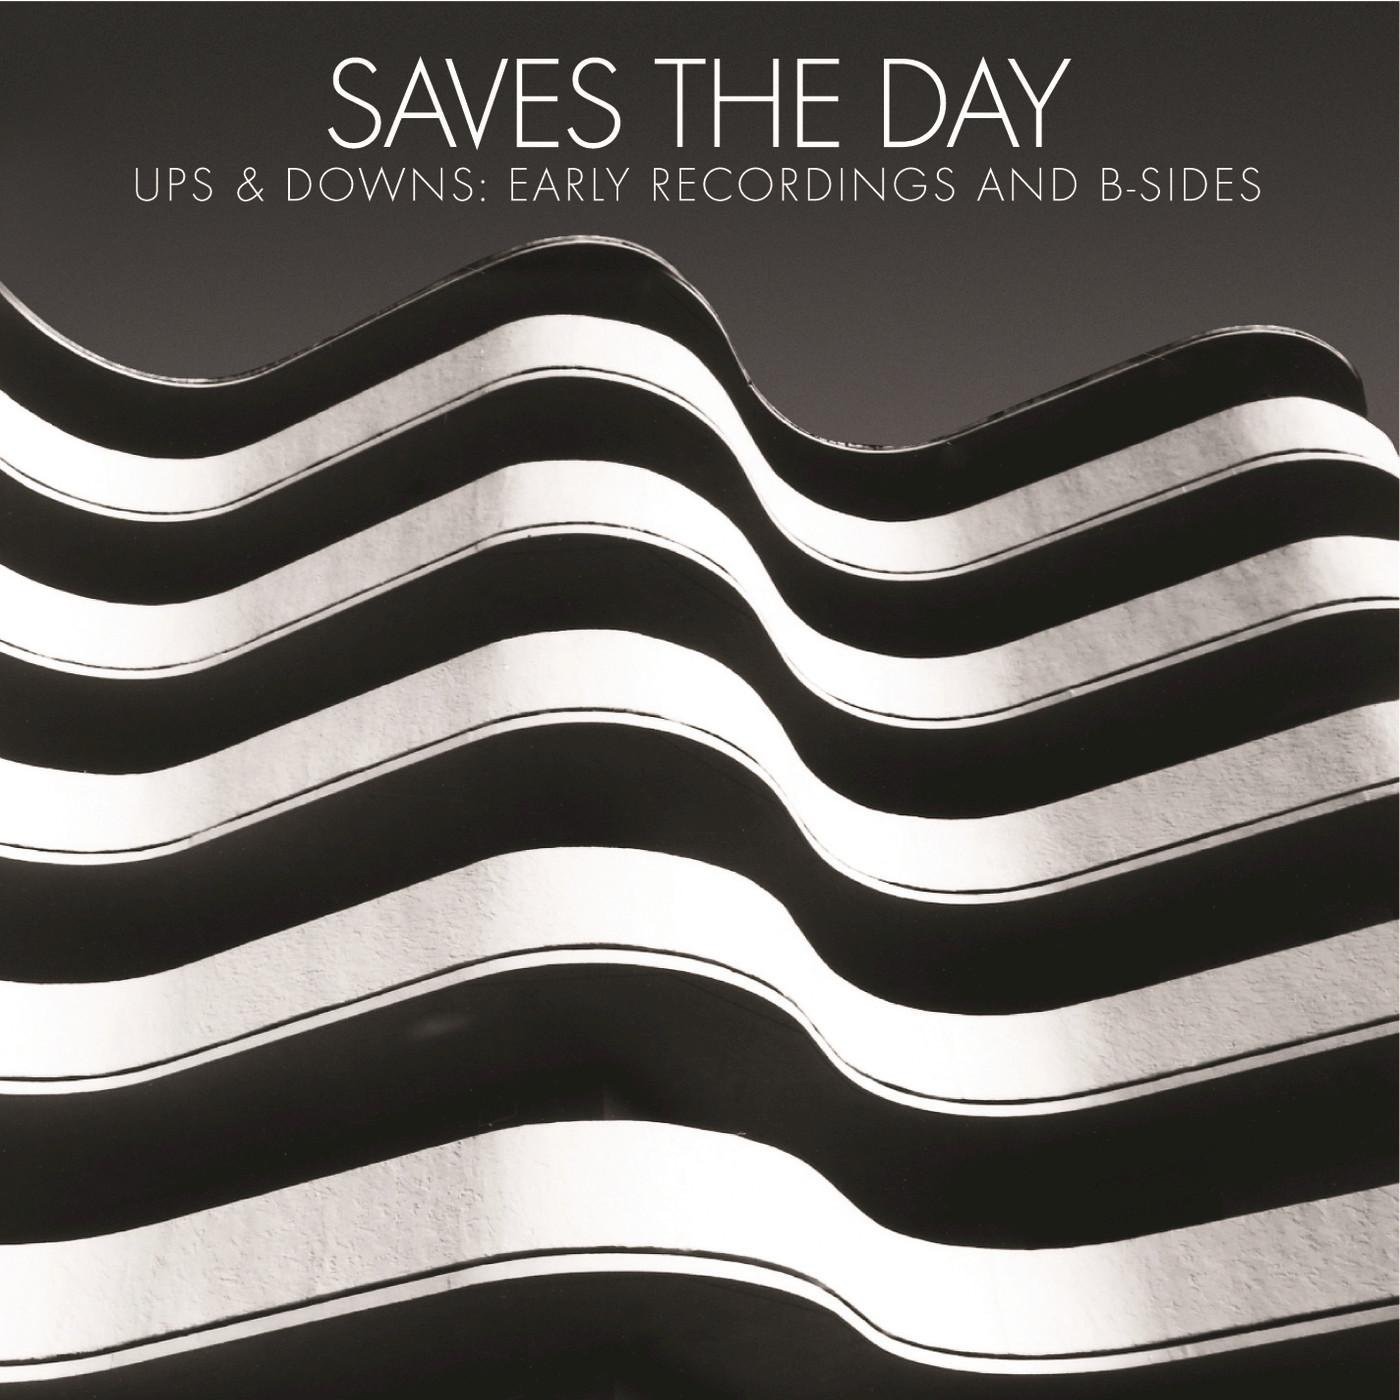 Ups & Downs: Early Recordings and B-Sides by Saves The Day